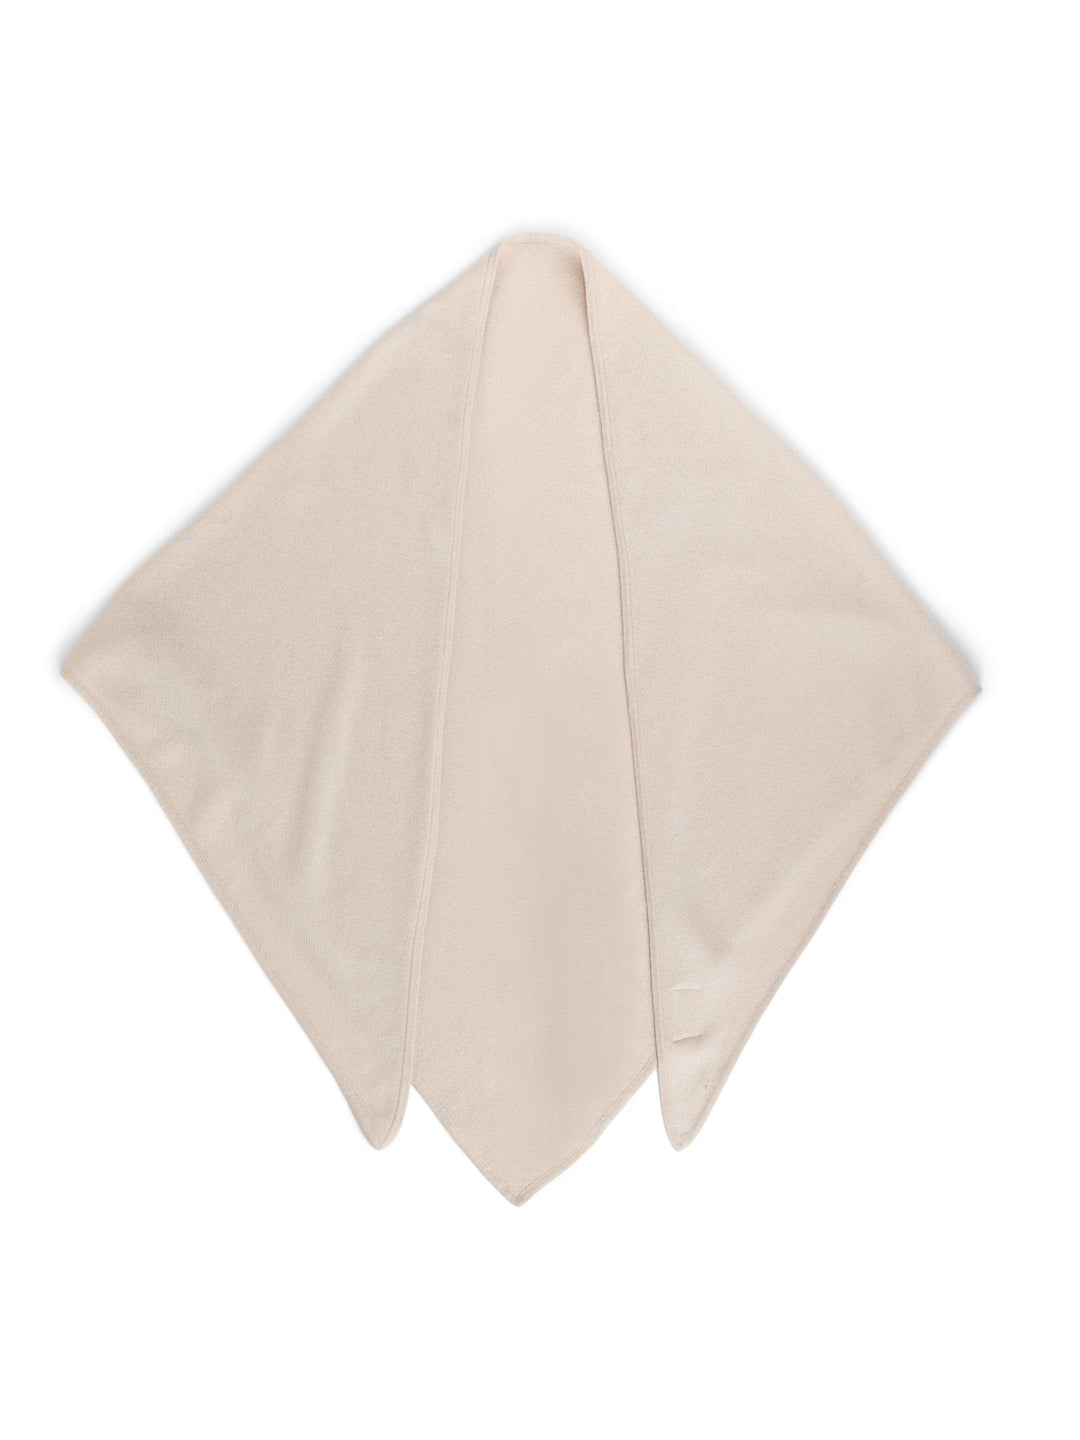 Cashmere scarf "Triangle" in 100% pure cashmere. Scandinavian design by Kashmina of Norway. Color: Cream.